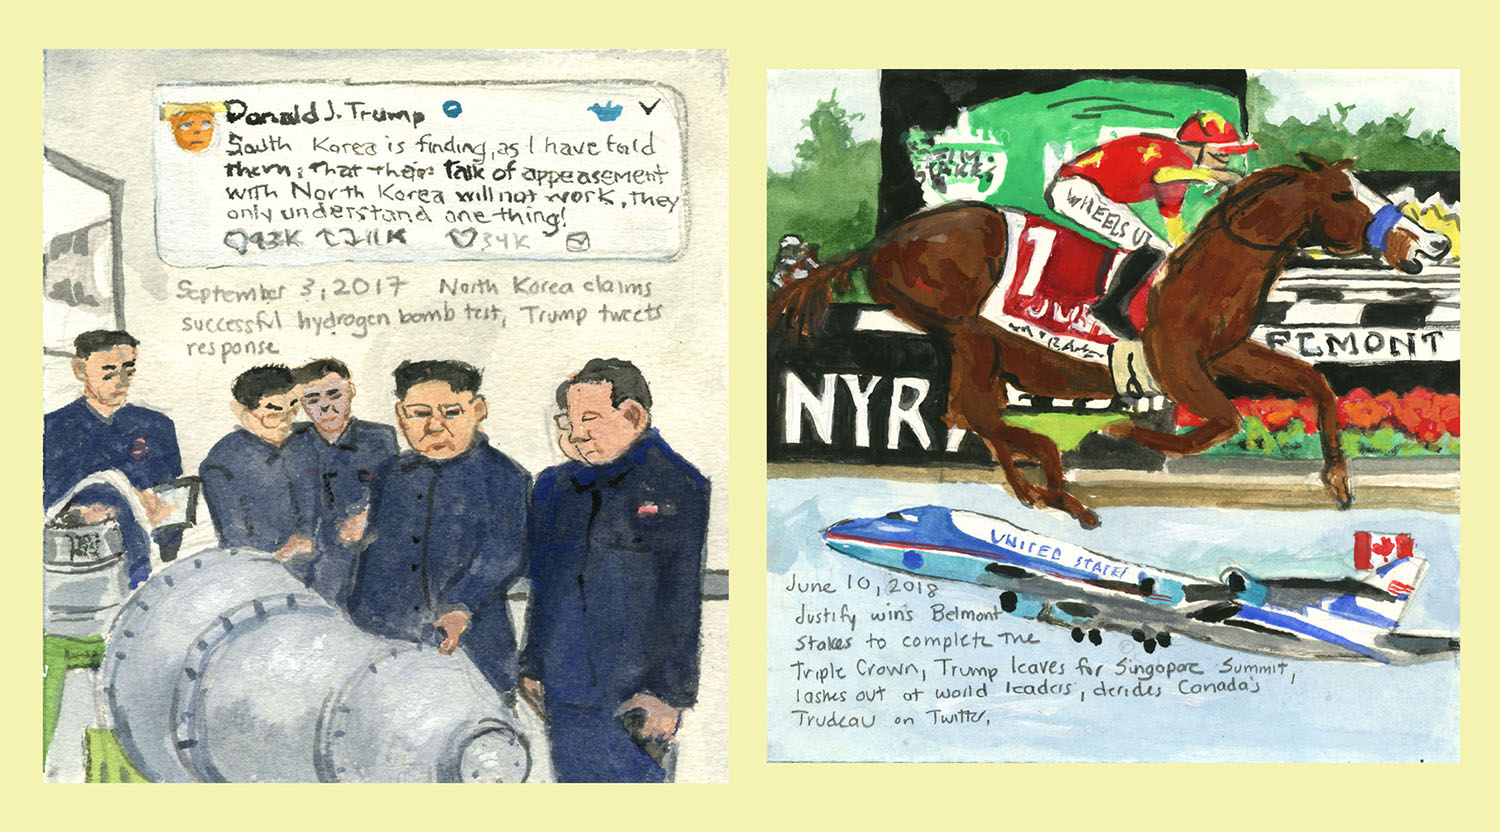 (LEFT): Day 652 (Sept. 3, 2017). Watercolor, gouache, graphite on paper, 5 ½ x 5 in. <i>North Korea claims successful hydrogen bomb test, Trump tweets response.</i> (RIGHT): Day 932 (June 10, 2018). Watercolor, gouache, graphite on paper, 5 ½ x 5 ½ in. <i>Justify wins Belmont Stakes to complete the Triple Crown, Trump leaves for Singapore Summit, lashes out at world leaders, derides Canada’s Trudeau on Twitter.</i>